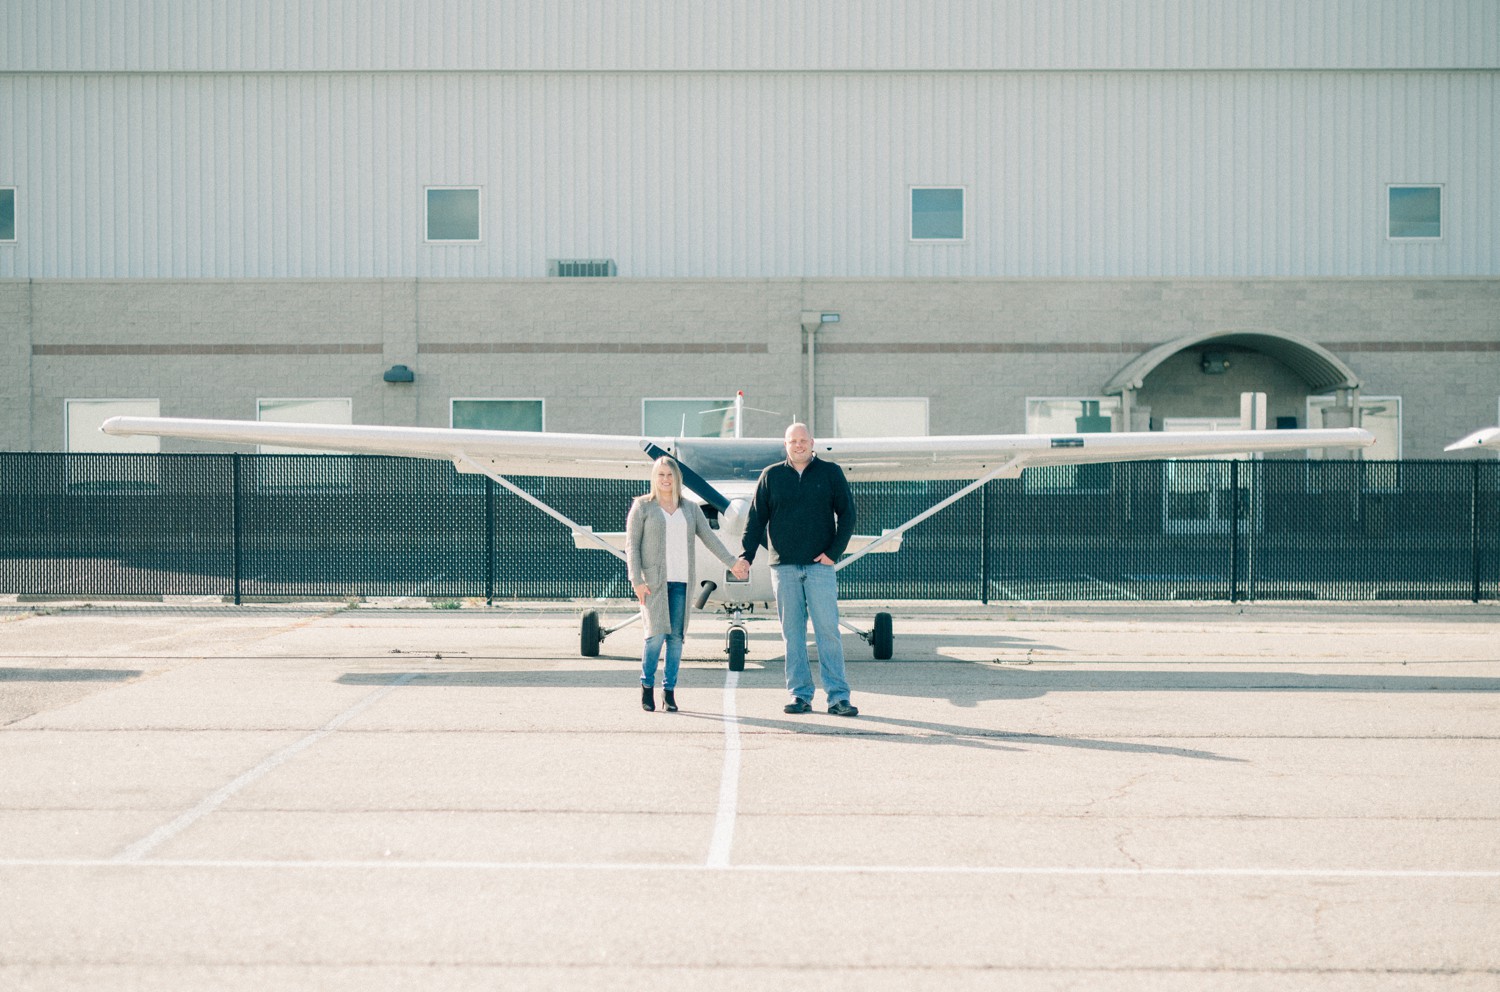 Engagement Photos in front of airplane in Denver.